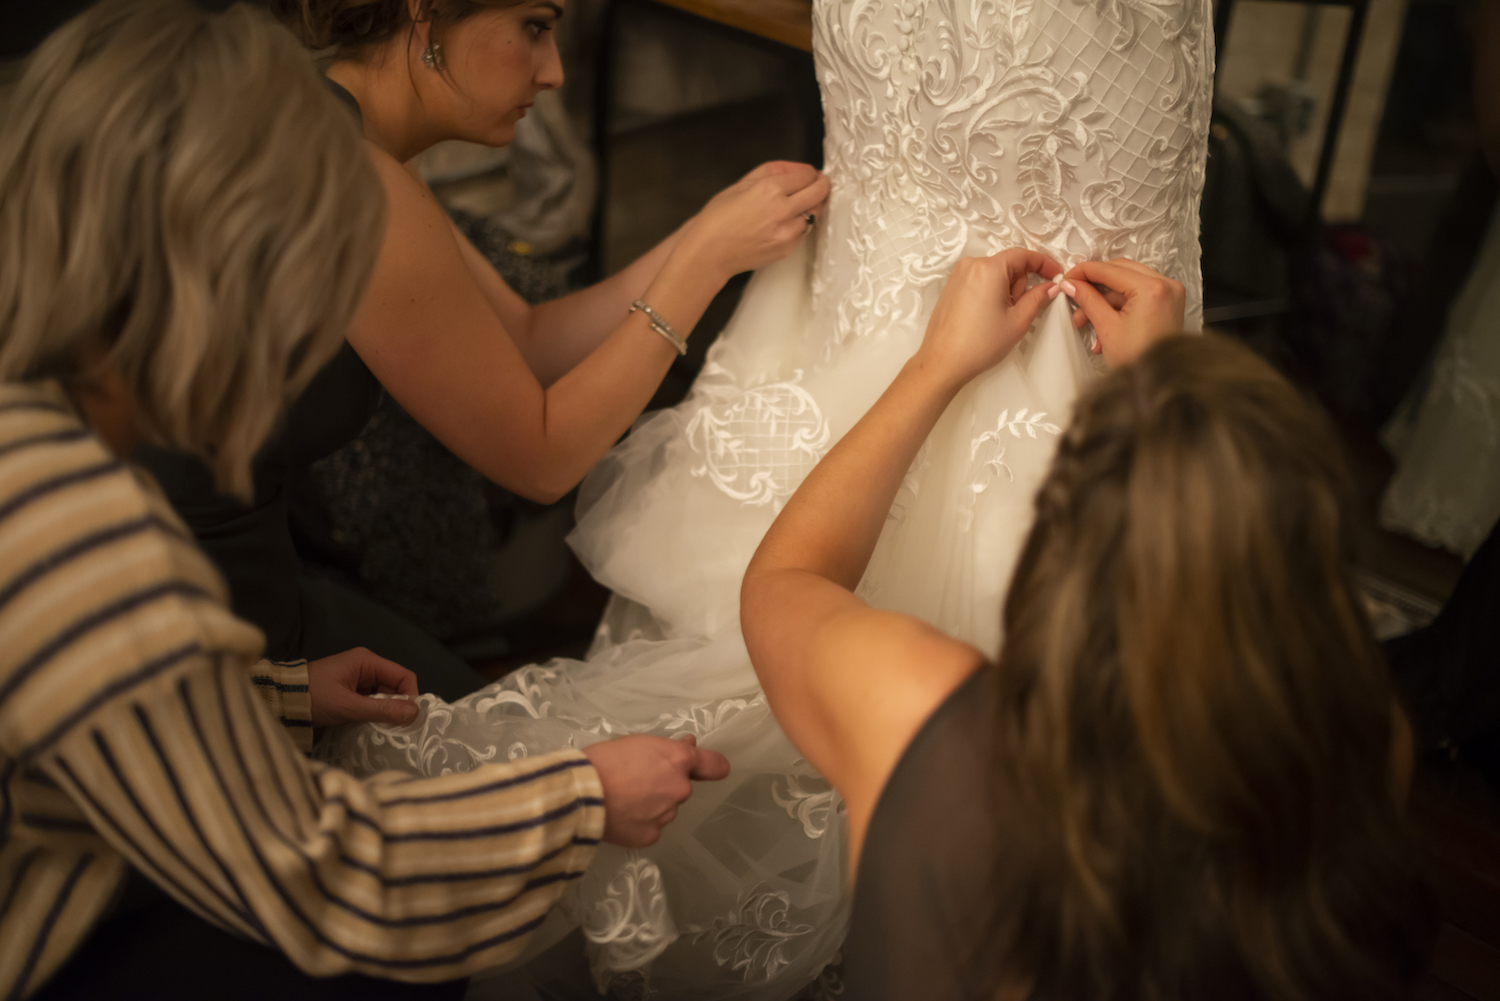 Bride's dress being buttoned up in back